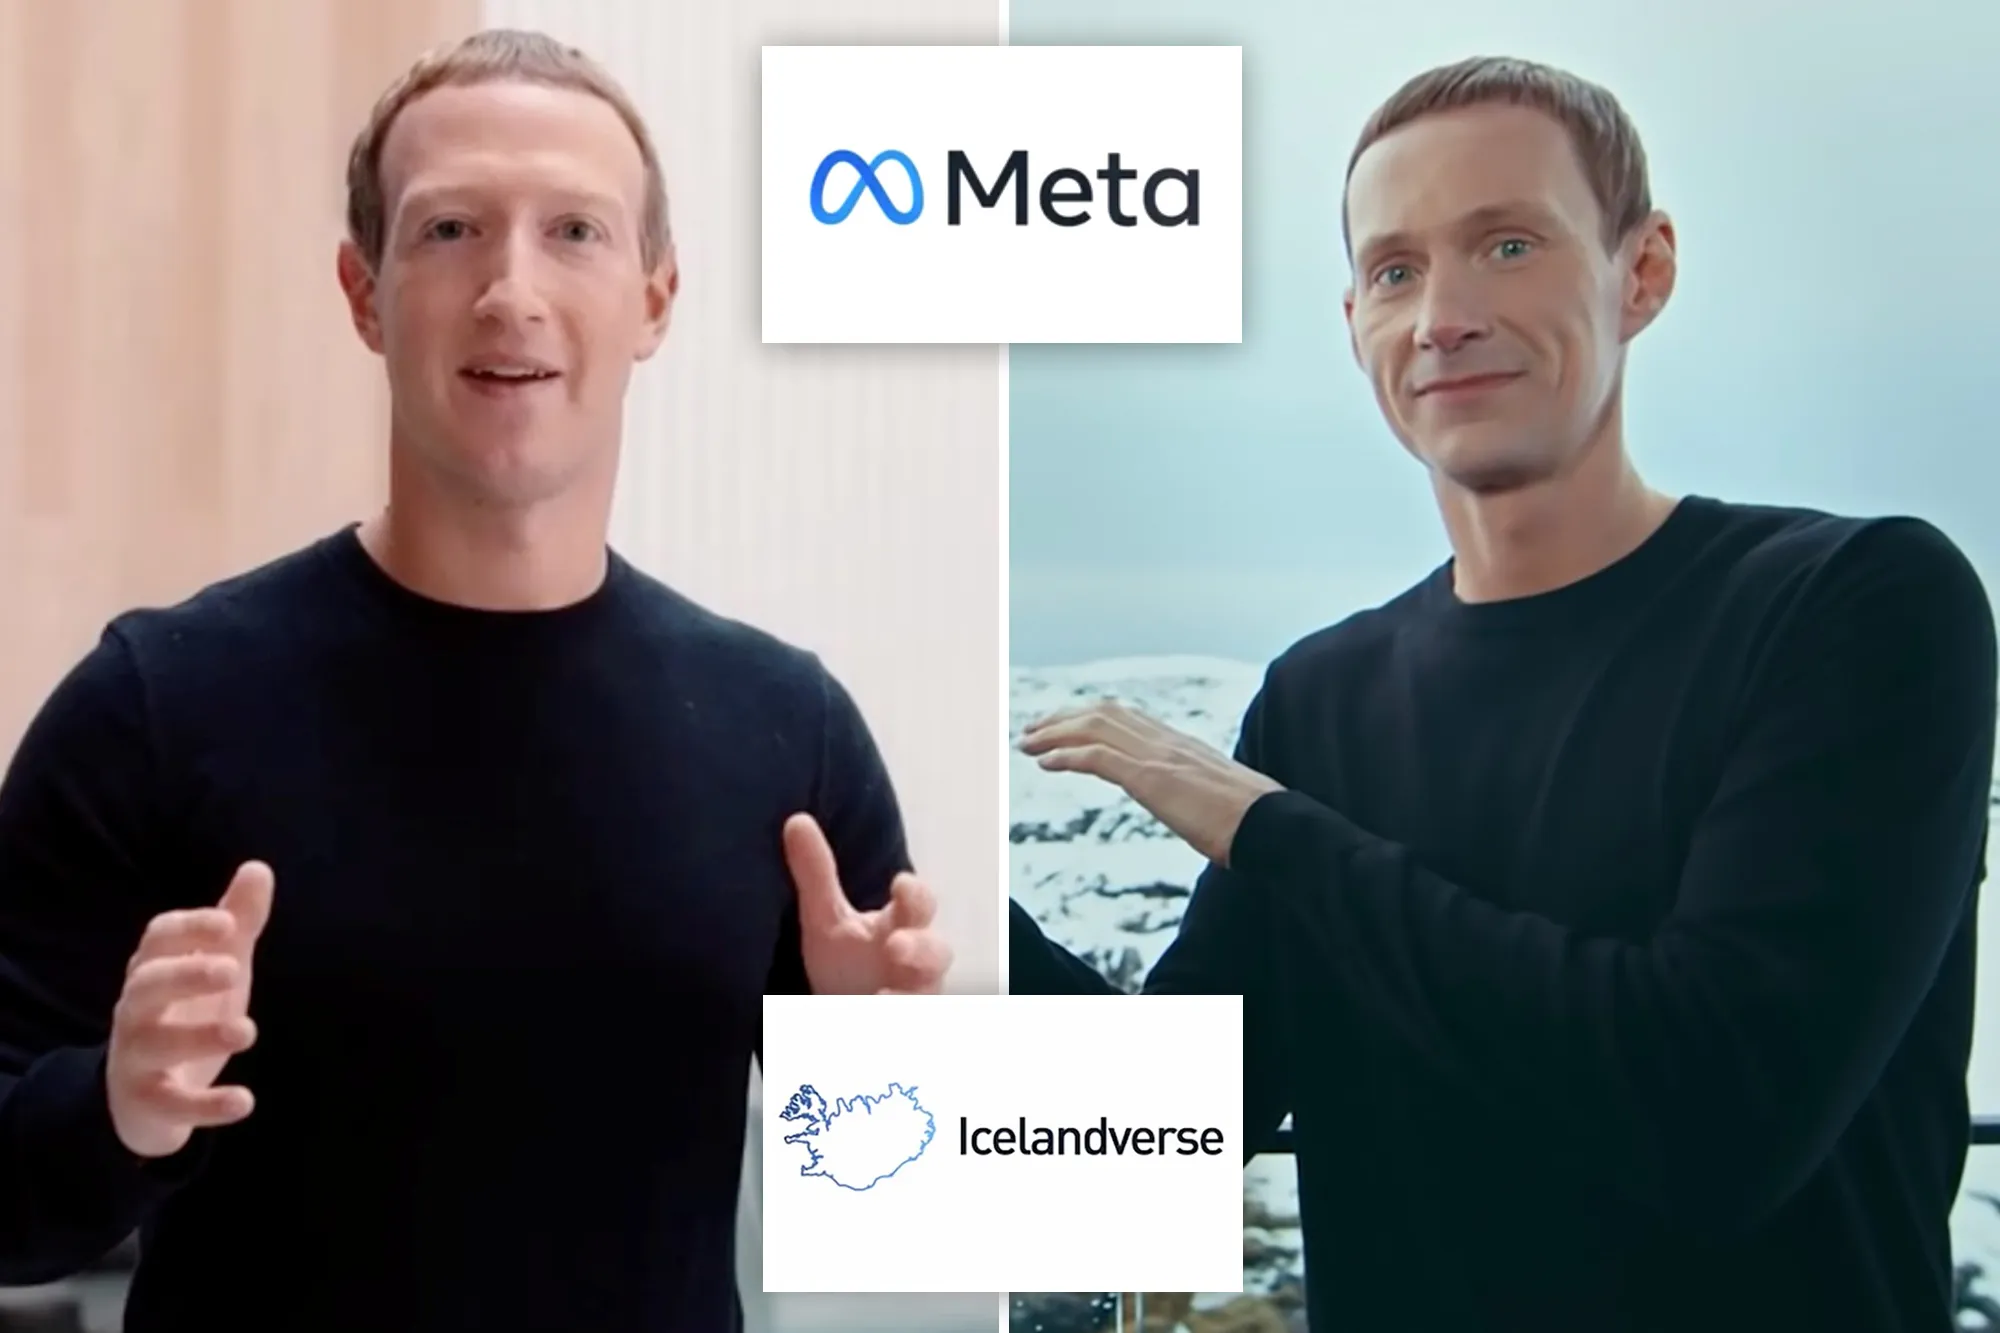 Iceland has released a promotional video which inspired by Zuckerberg